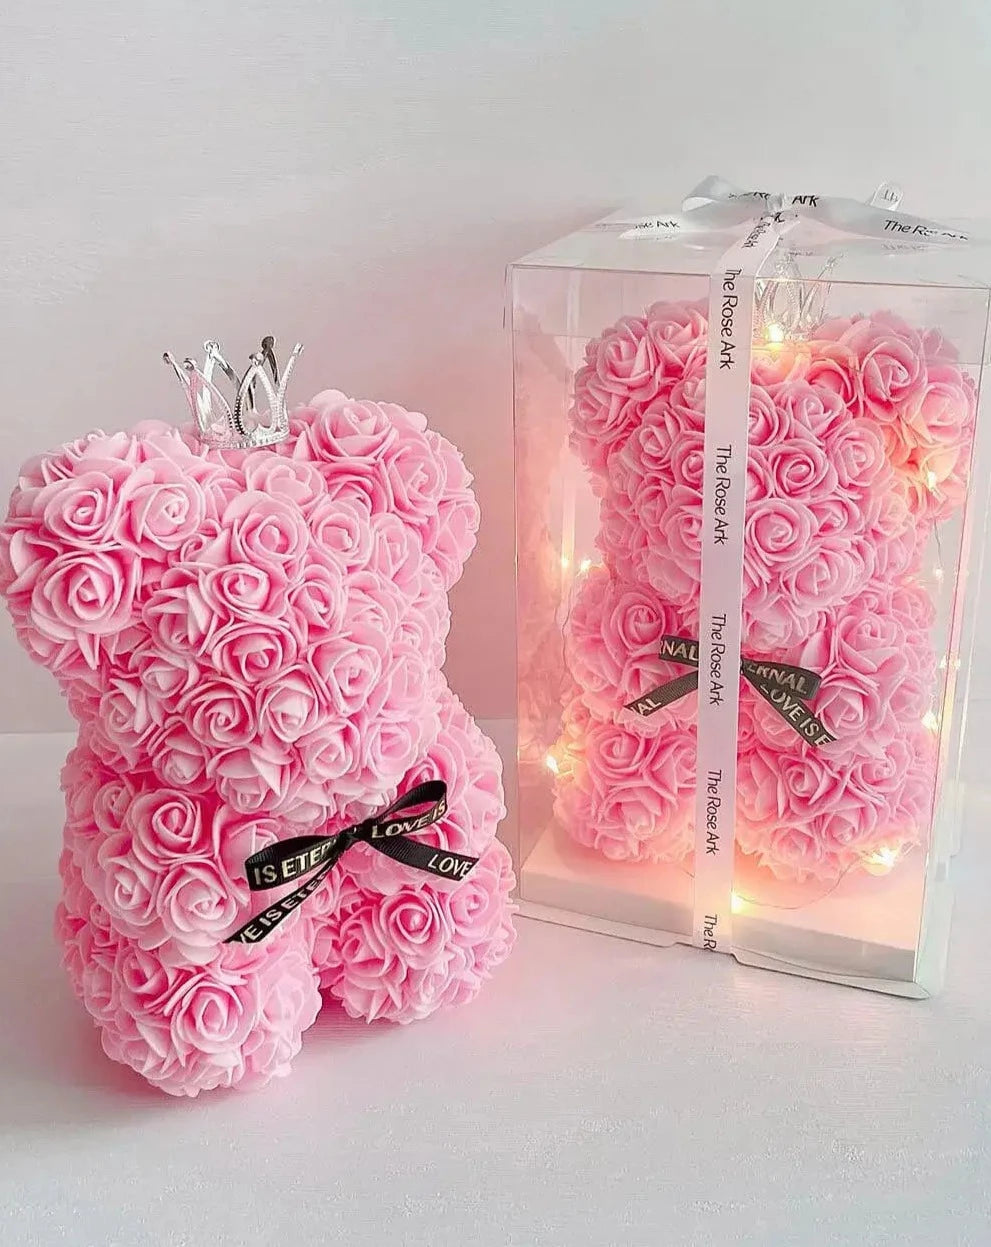 25cm Pink Rose Bear with Fairy Lights in Box The Rose Ark